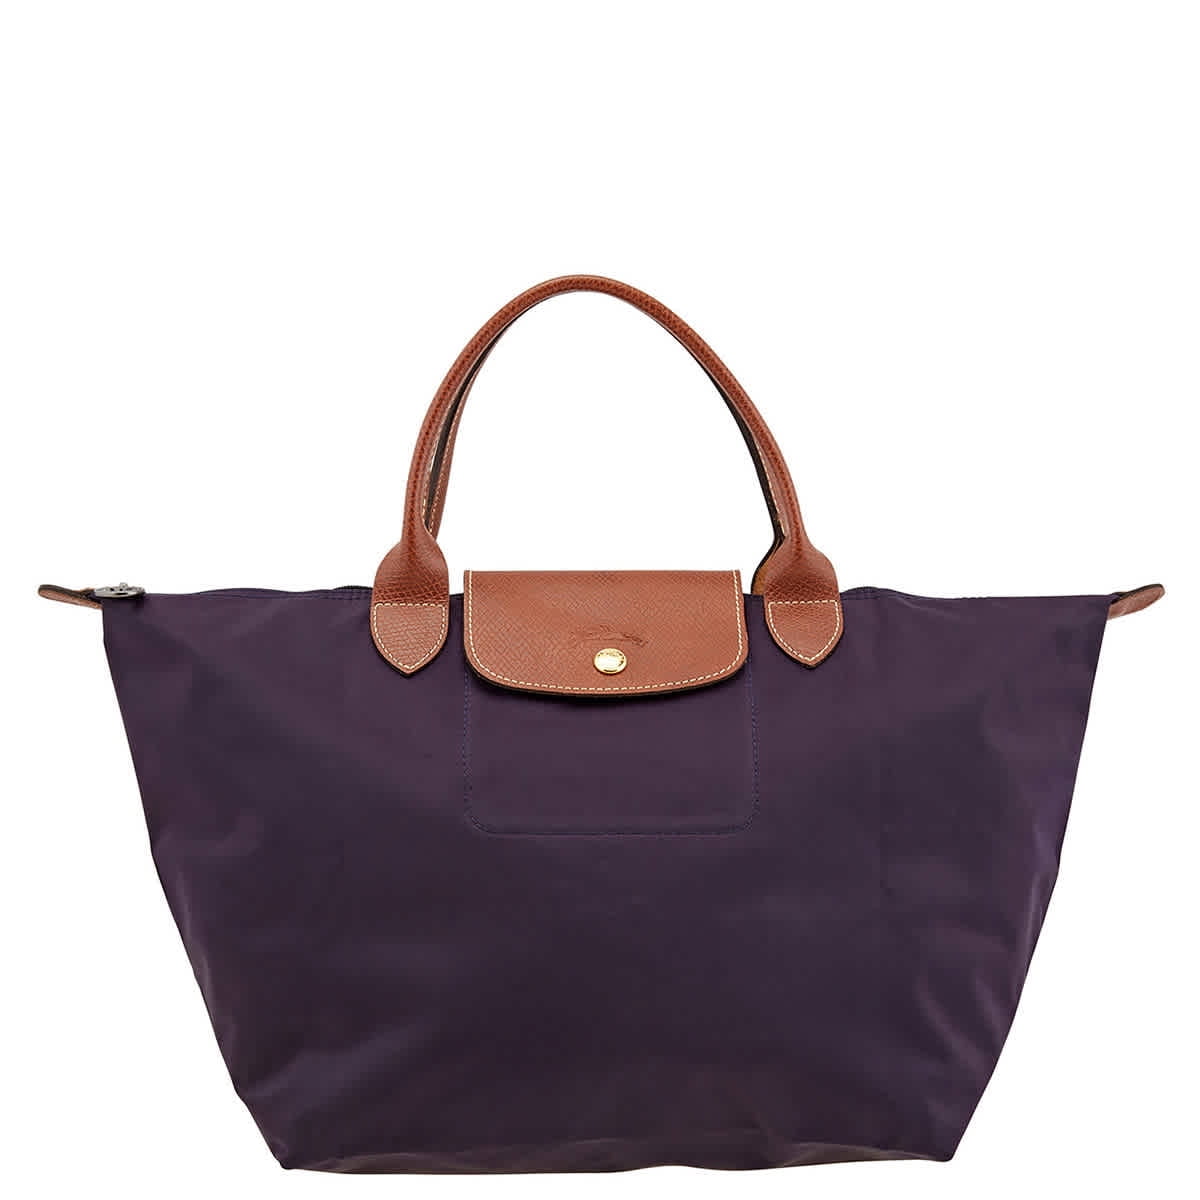 Longchamp, Bags, Longchamp Pouch With Handle